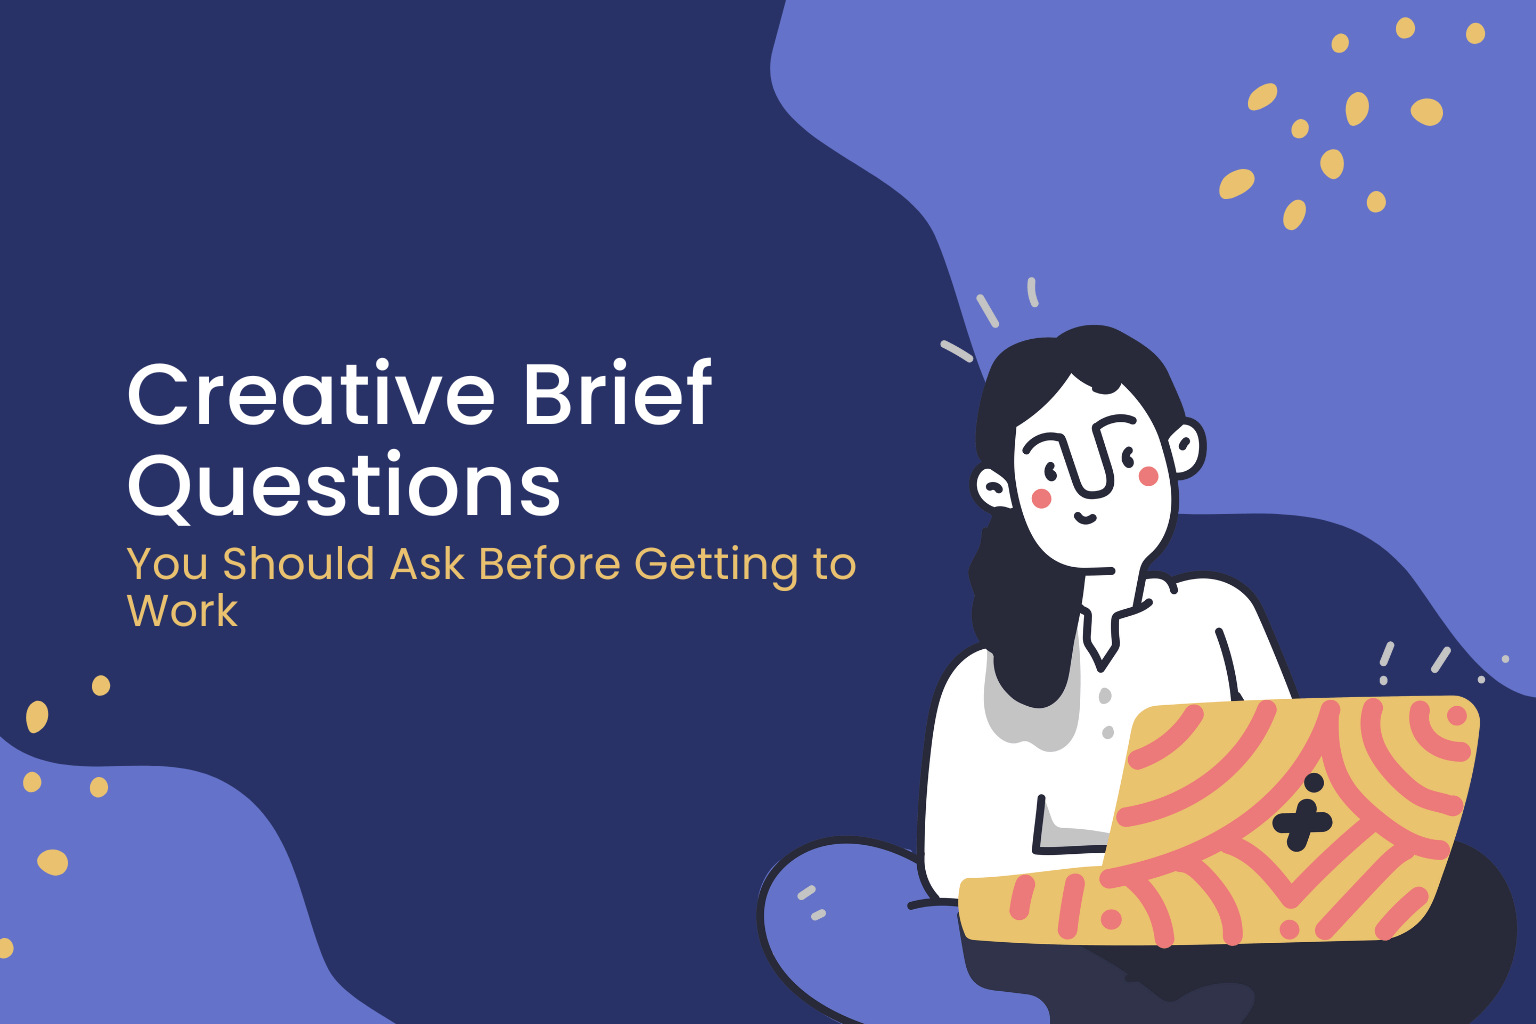 Creative Brief Questions You Should Ask Before Getting to Work